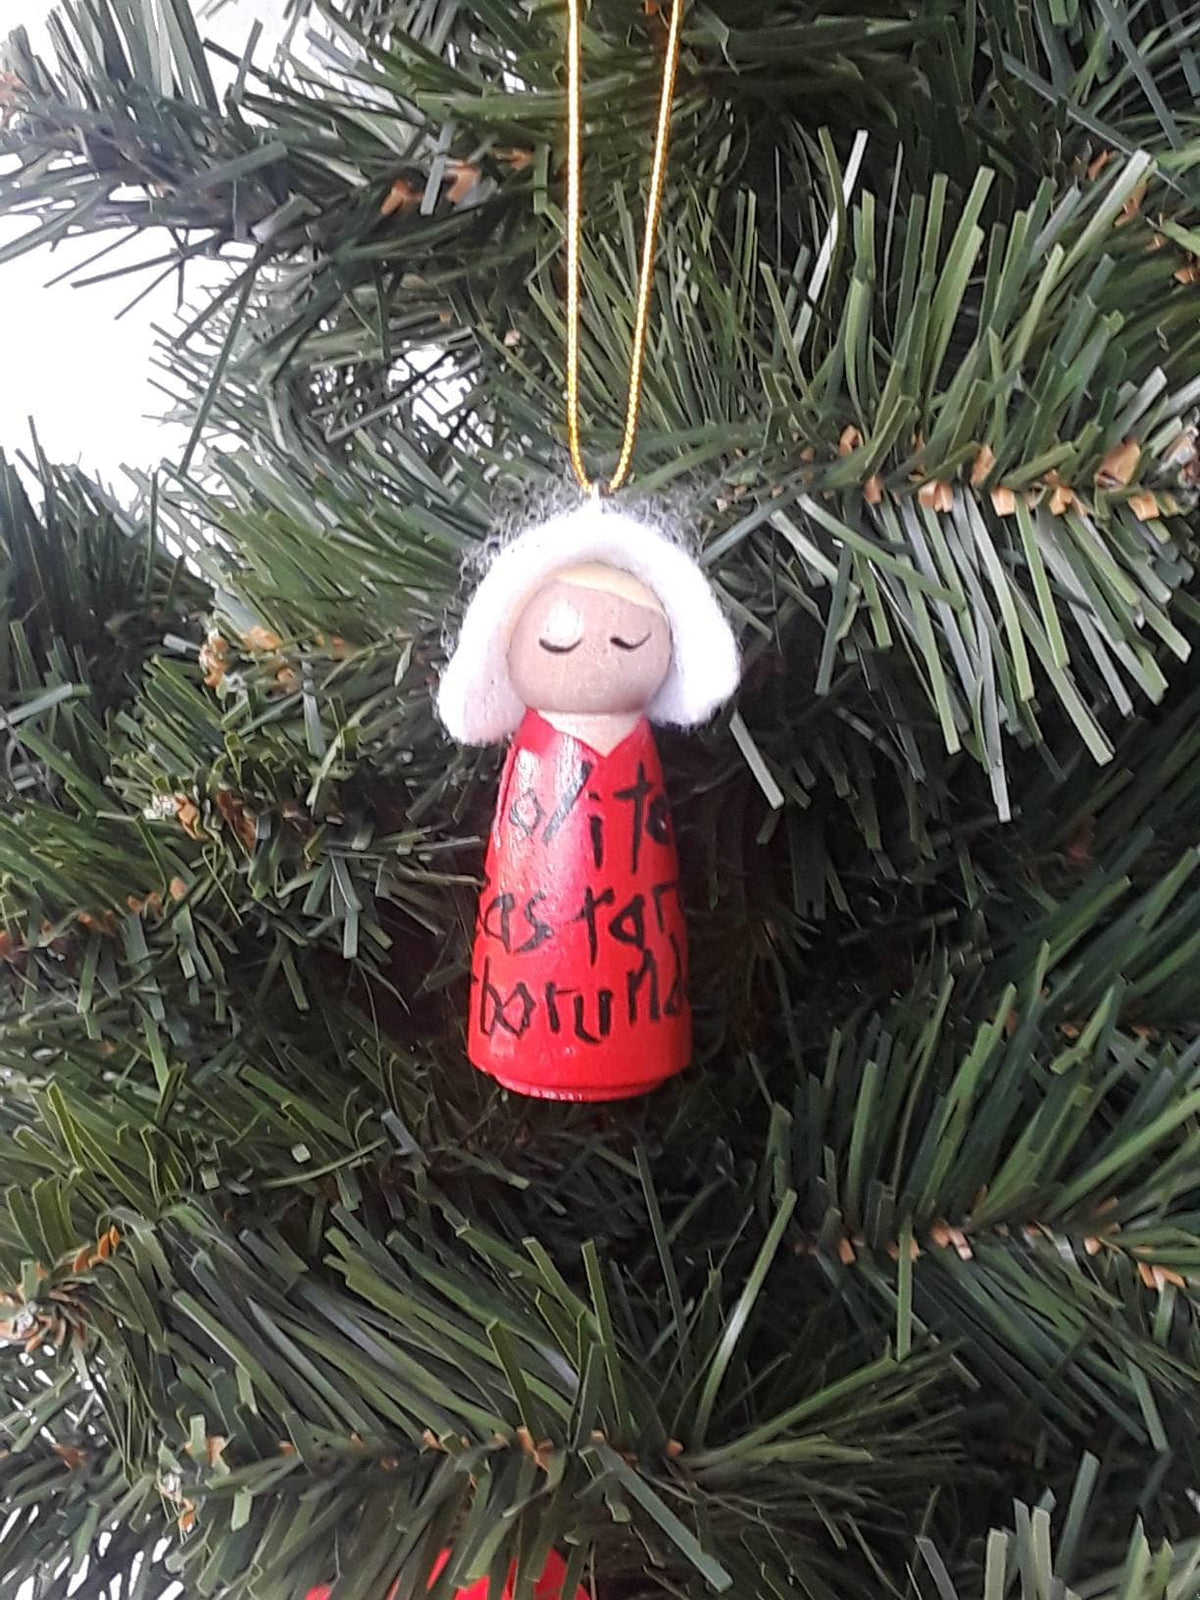 Offred Christmas ornaments, Offred ornament, Offred peg doll, Offred doll, Offred, Handmaids tale doll, Handmaids tale ornament